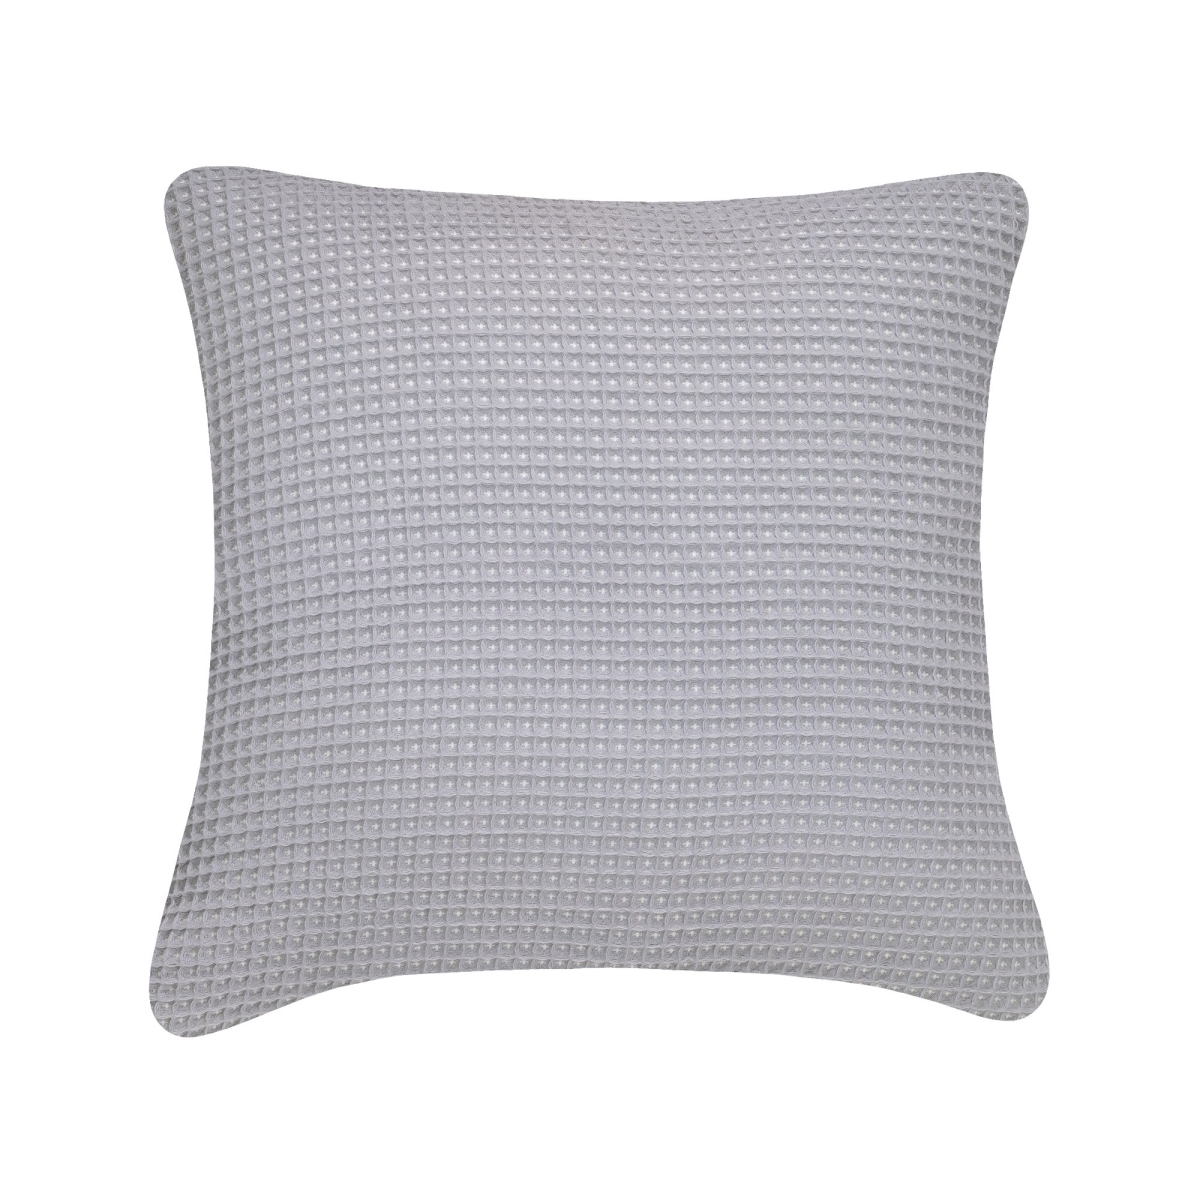 20 X 20 In. Waffle Decorative Cushion, White & Grey - 100 Percent Polyester